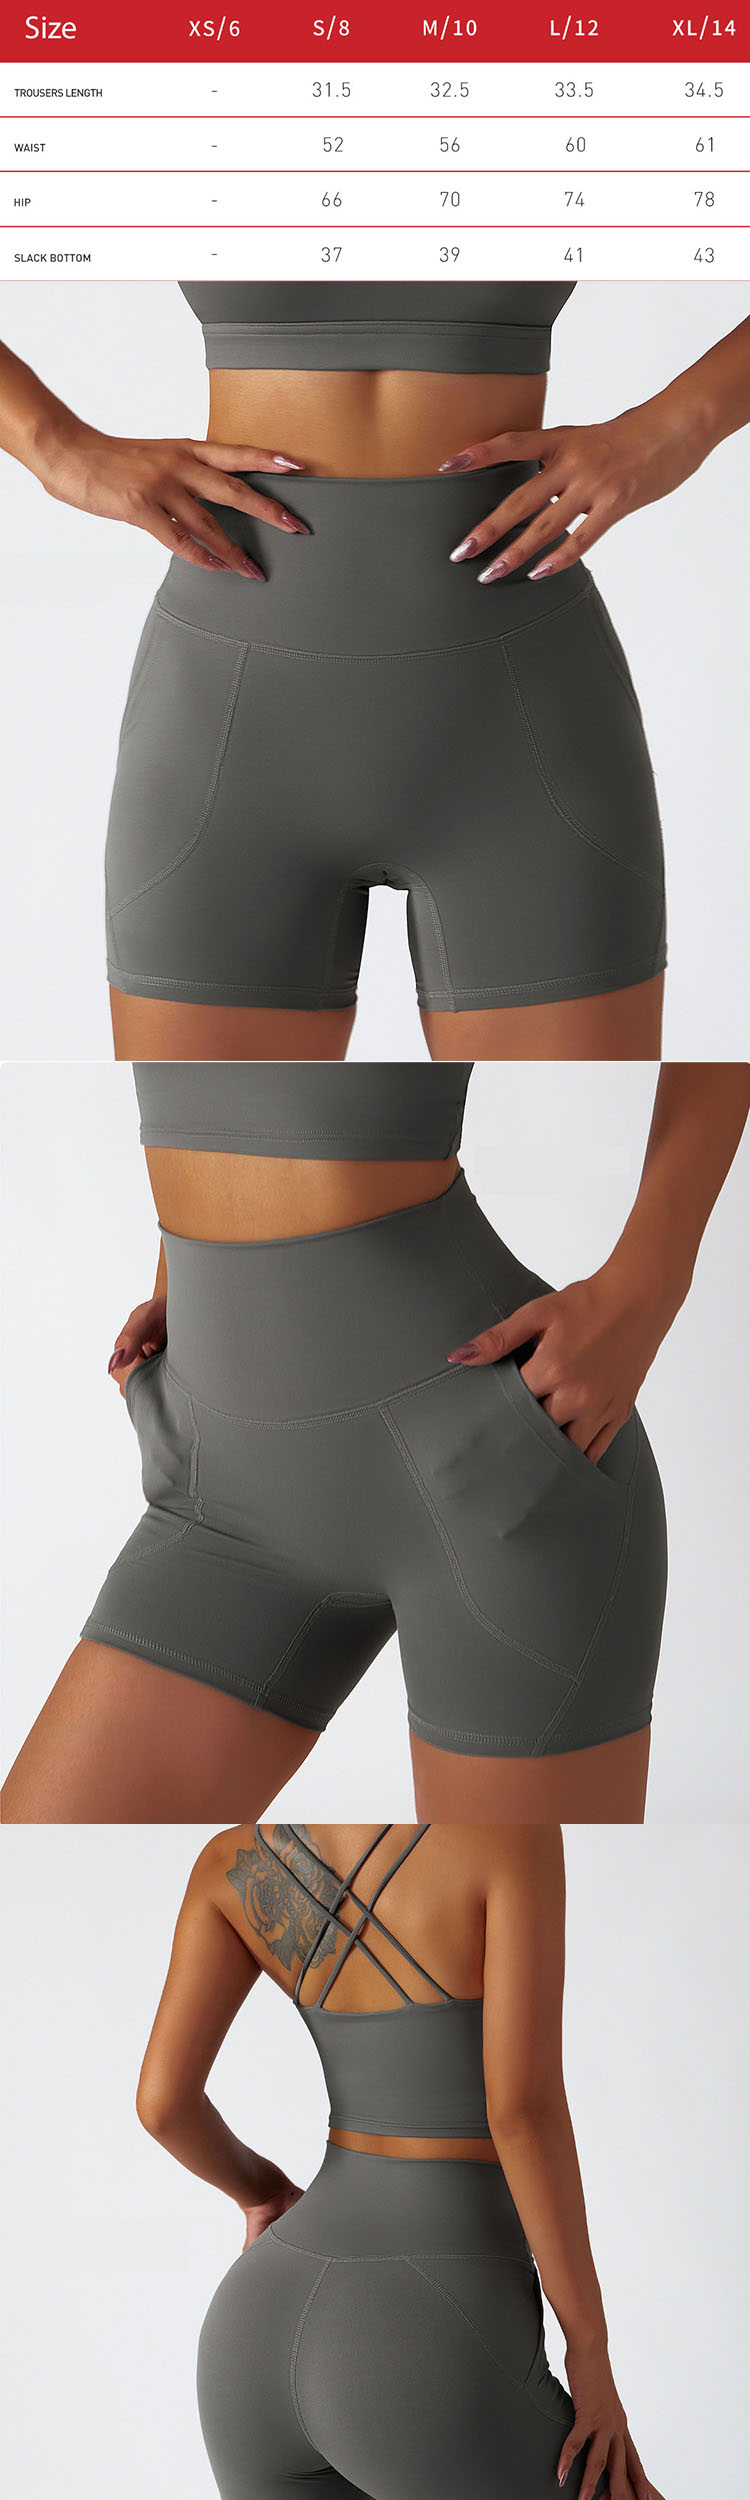 The popularity of sustainable yoga pants is in line with the needs of the times